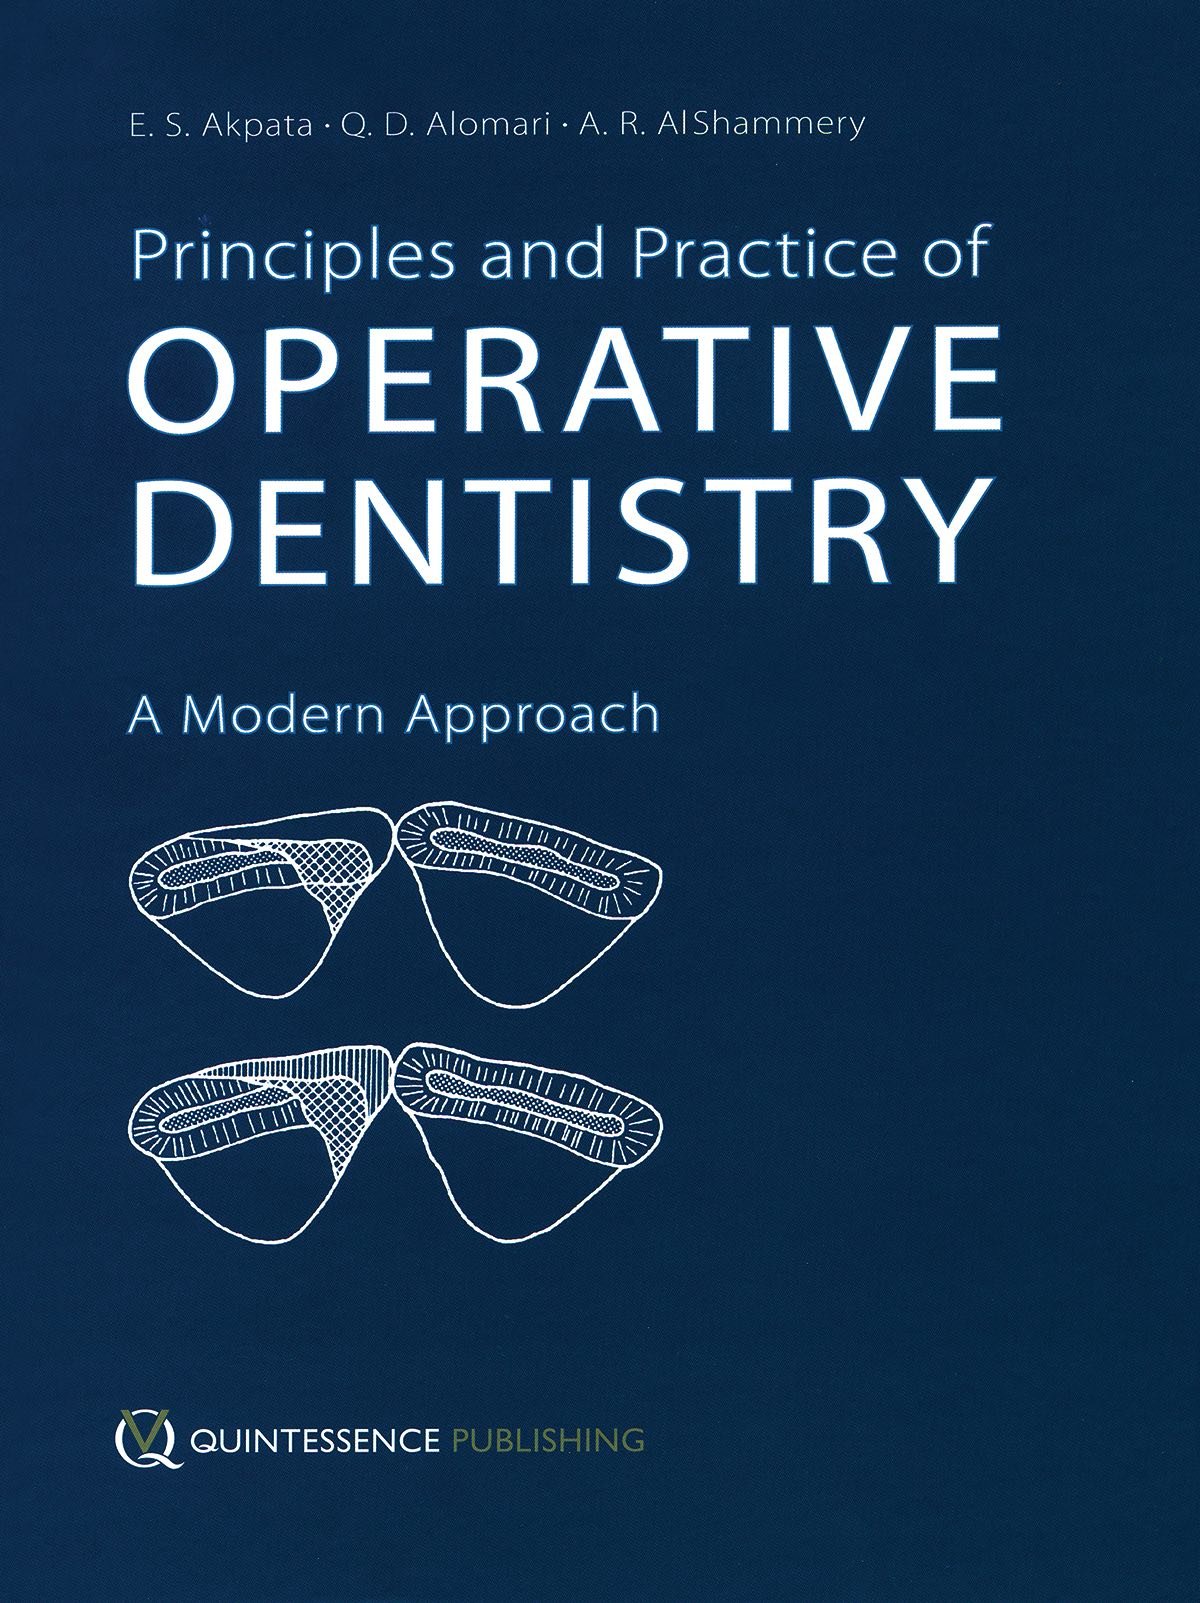 Akpata: Principles and Practice of Operative Dentistry